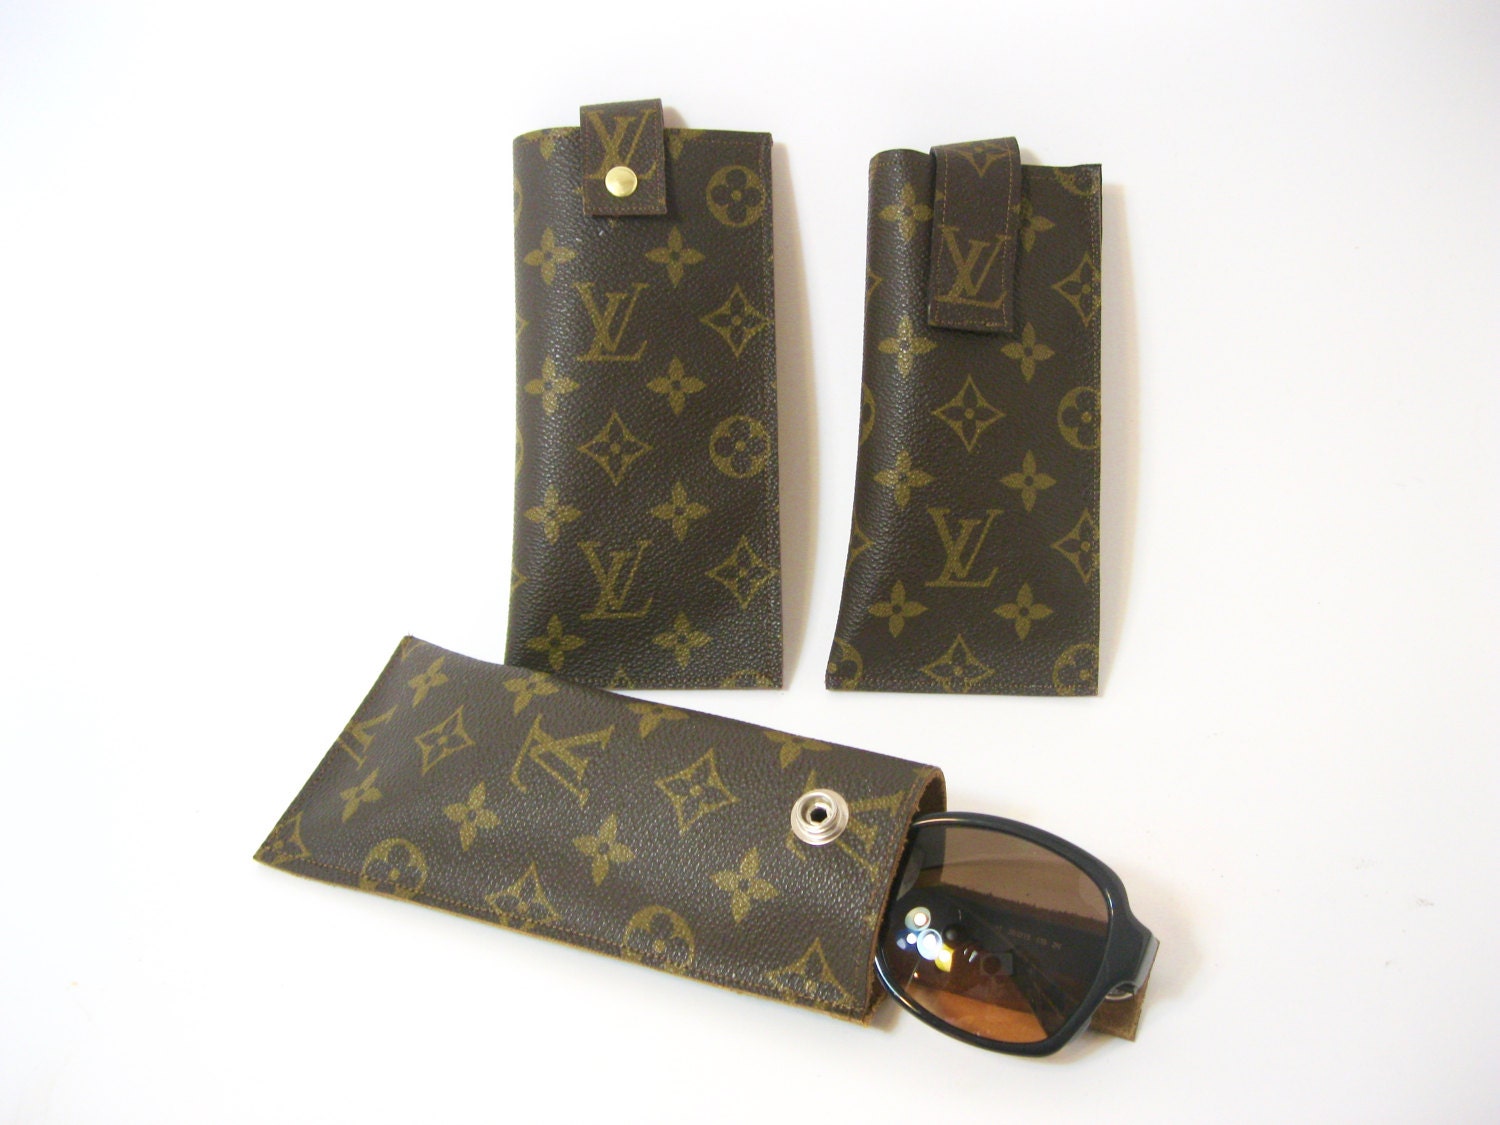 Upcycled Louis Vuitton Items | NAR Media Kit